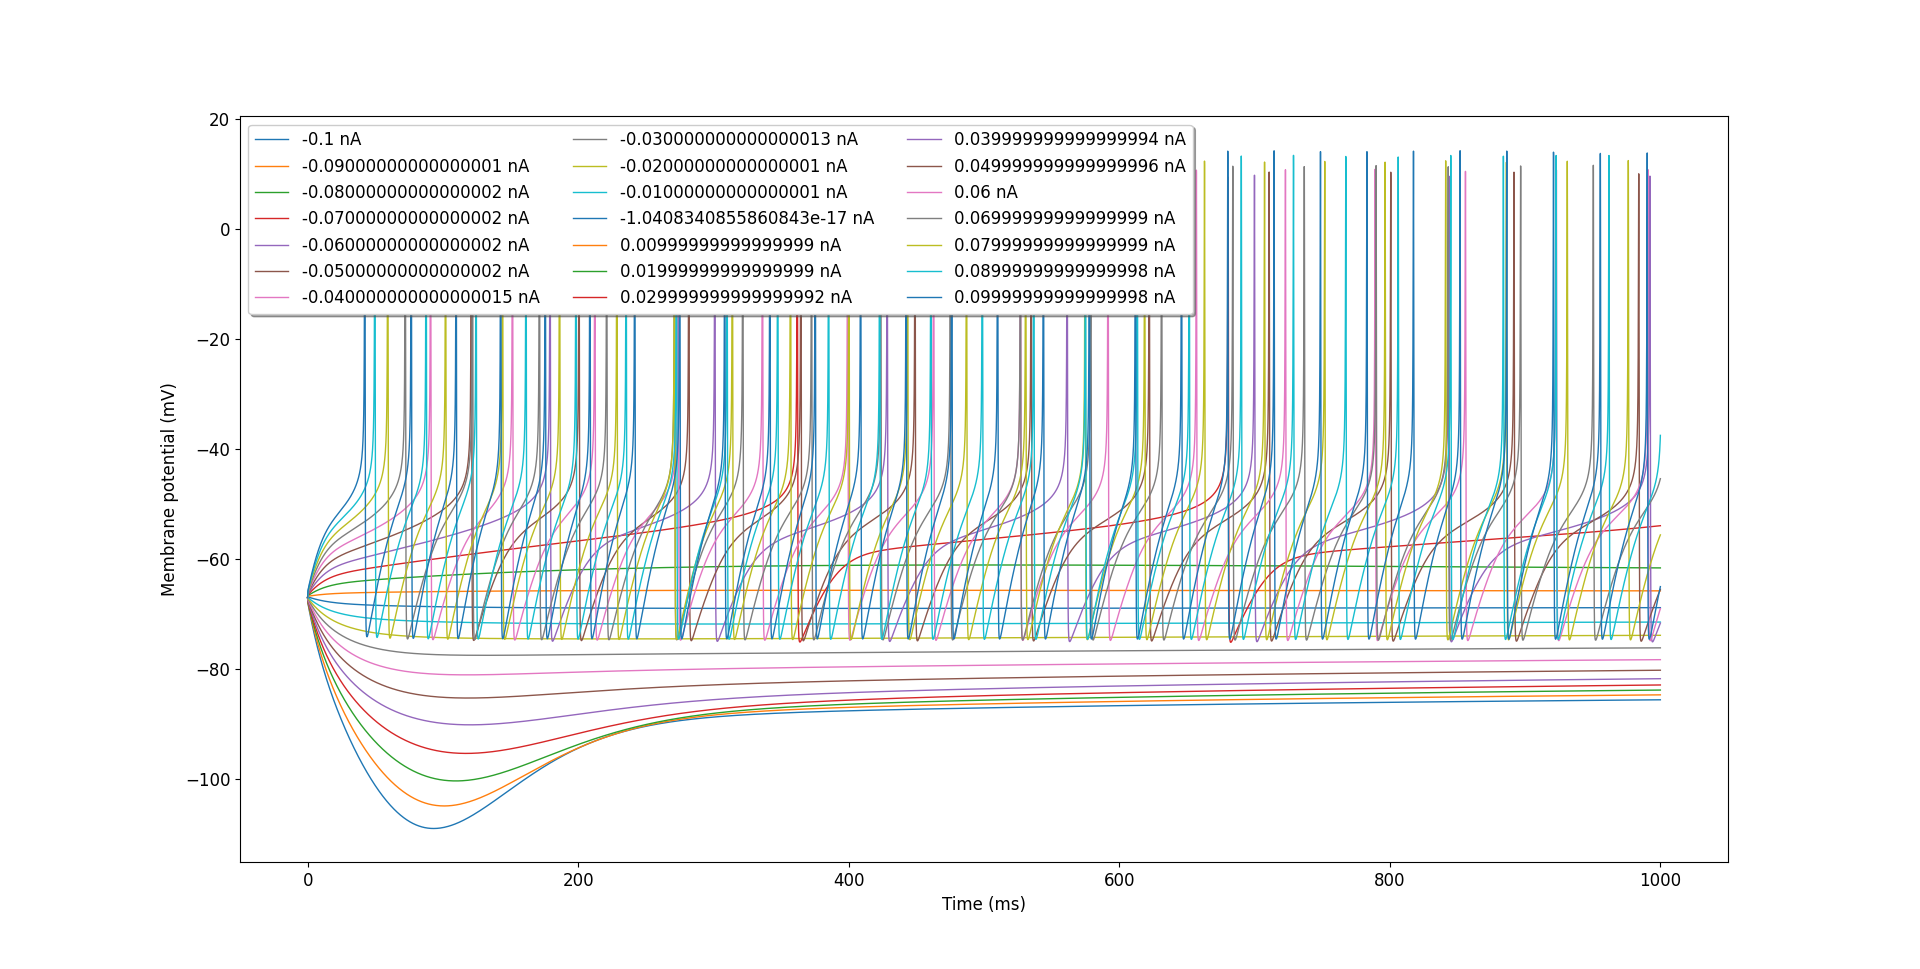 Voltage traces for OLM cell with different injection currents generated using `generate_current_vs_frequency_curve`.